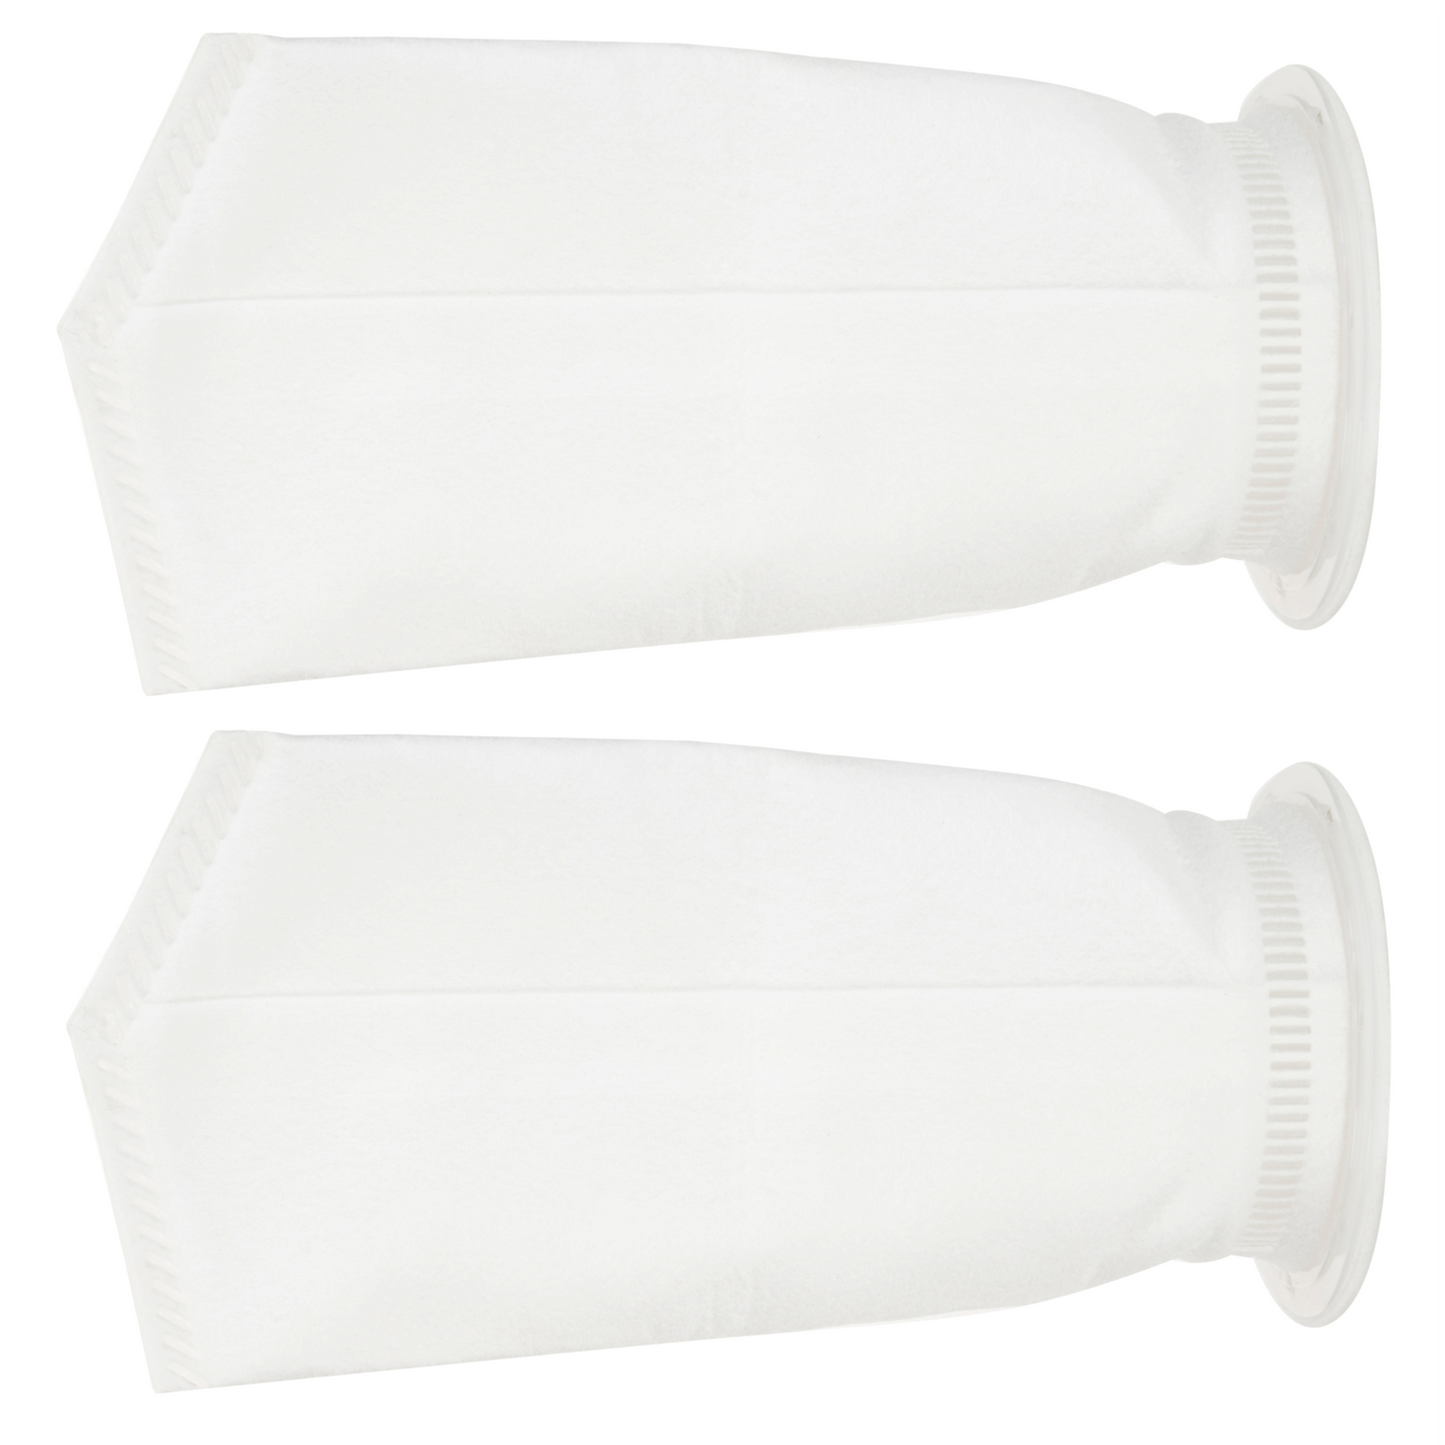 Sediment Filter FB-10-1M, Filter Bag 1 Micron for filtering sand (10 inch, Pack of 2)